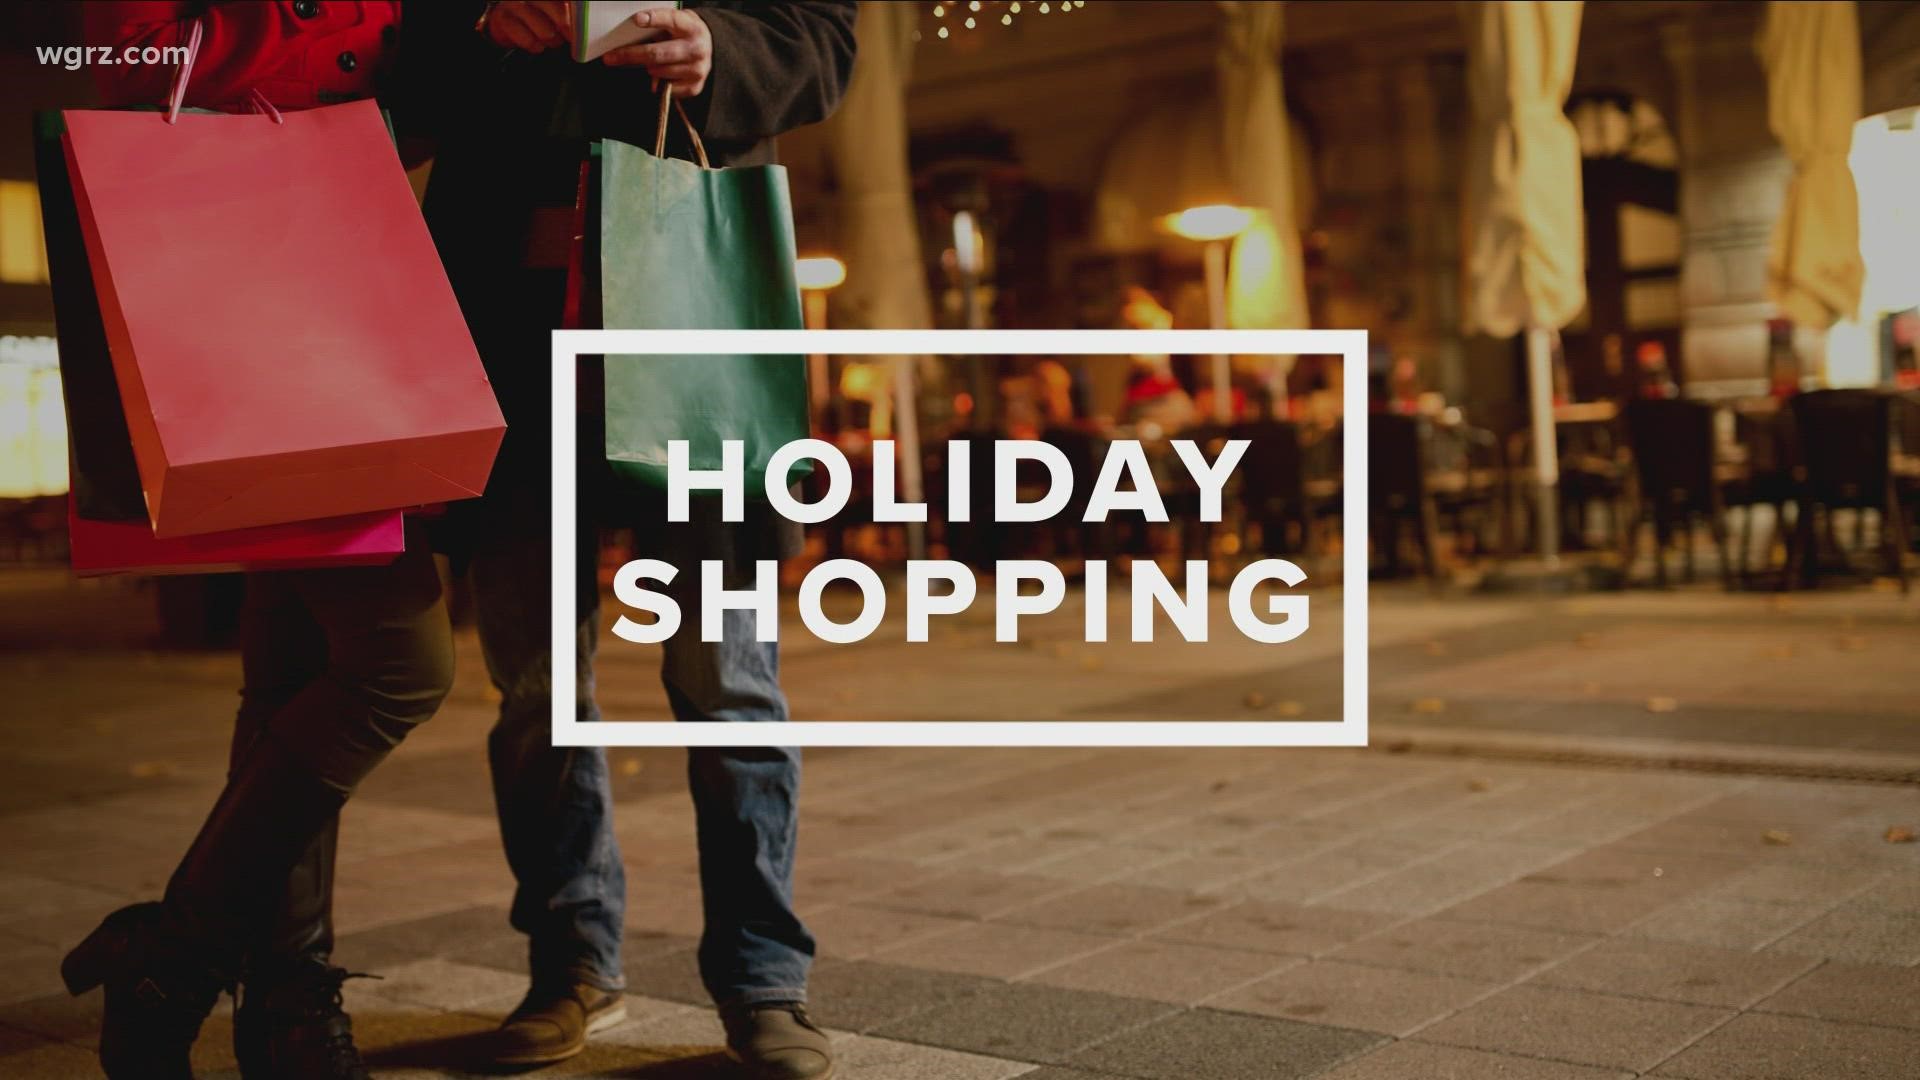 The retail holiday shopping season lasts from November through December, and shoppers are expected to spend nearly $1 trillion on gifts and holiday items.